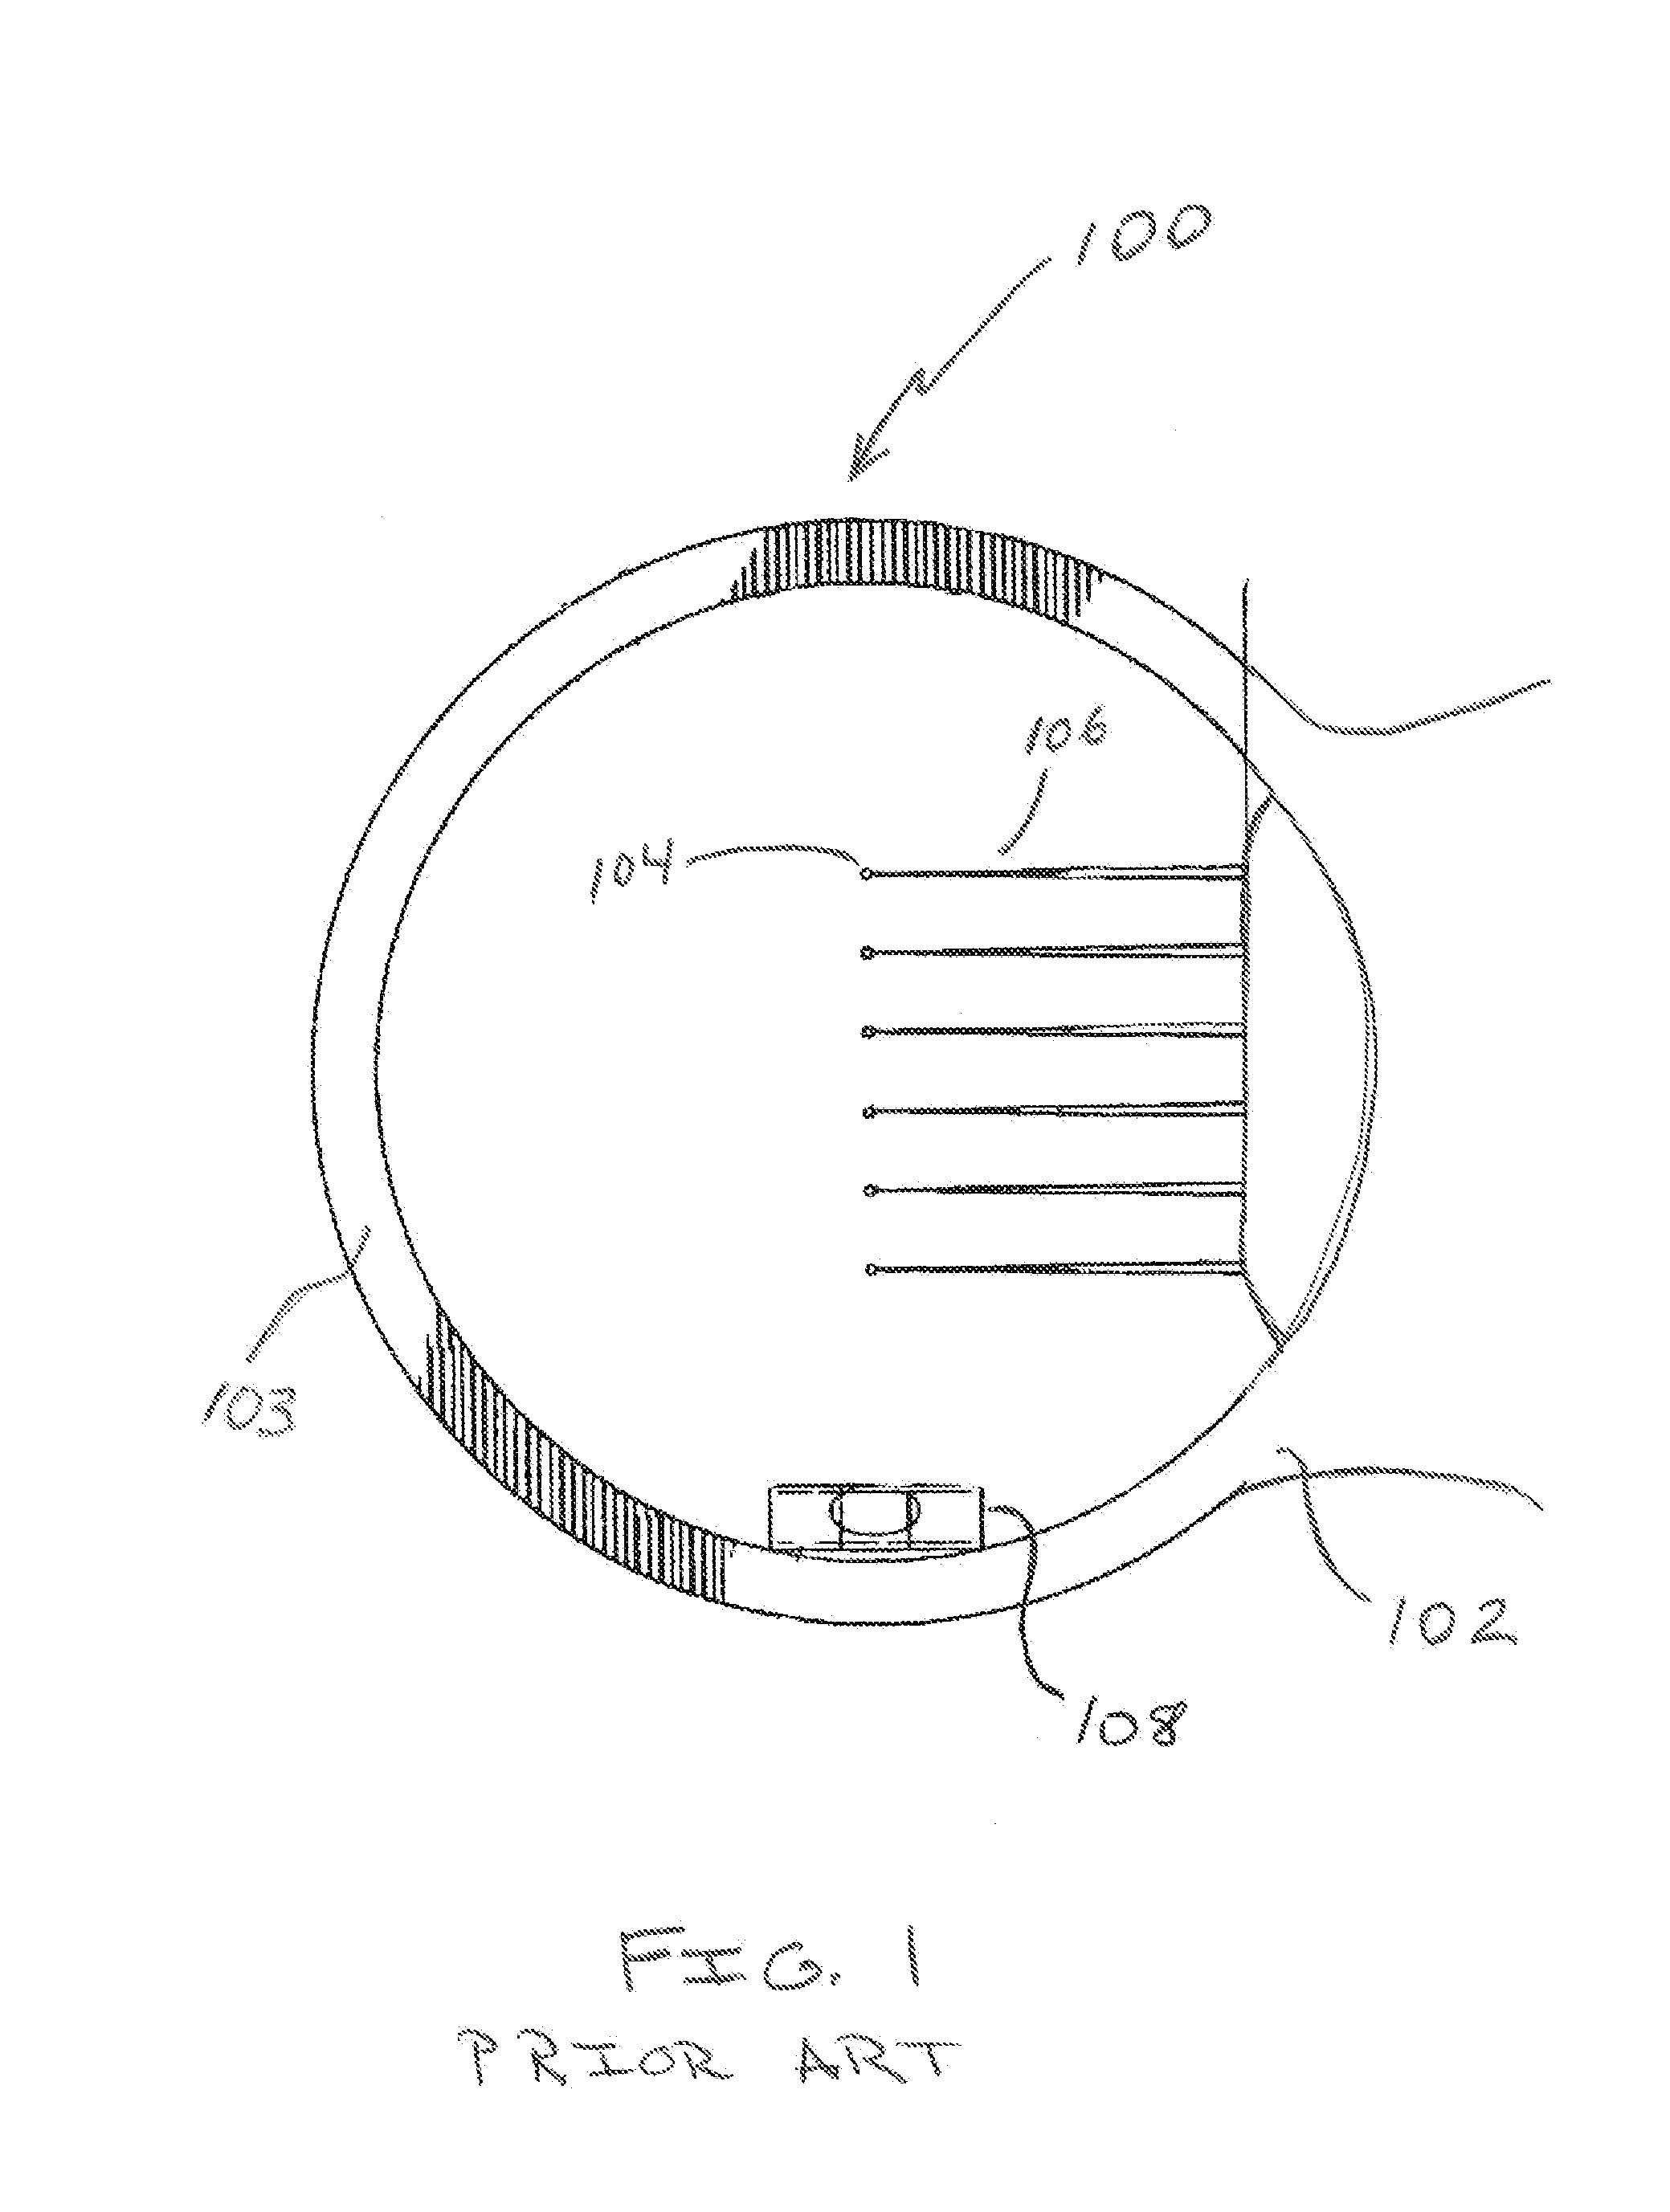 Apparatus, system and method for archery sight settings